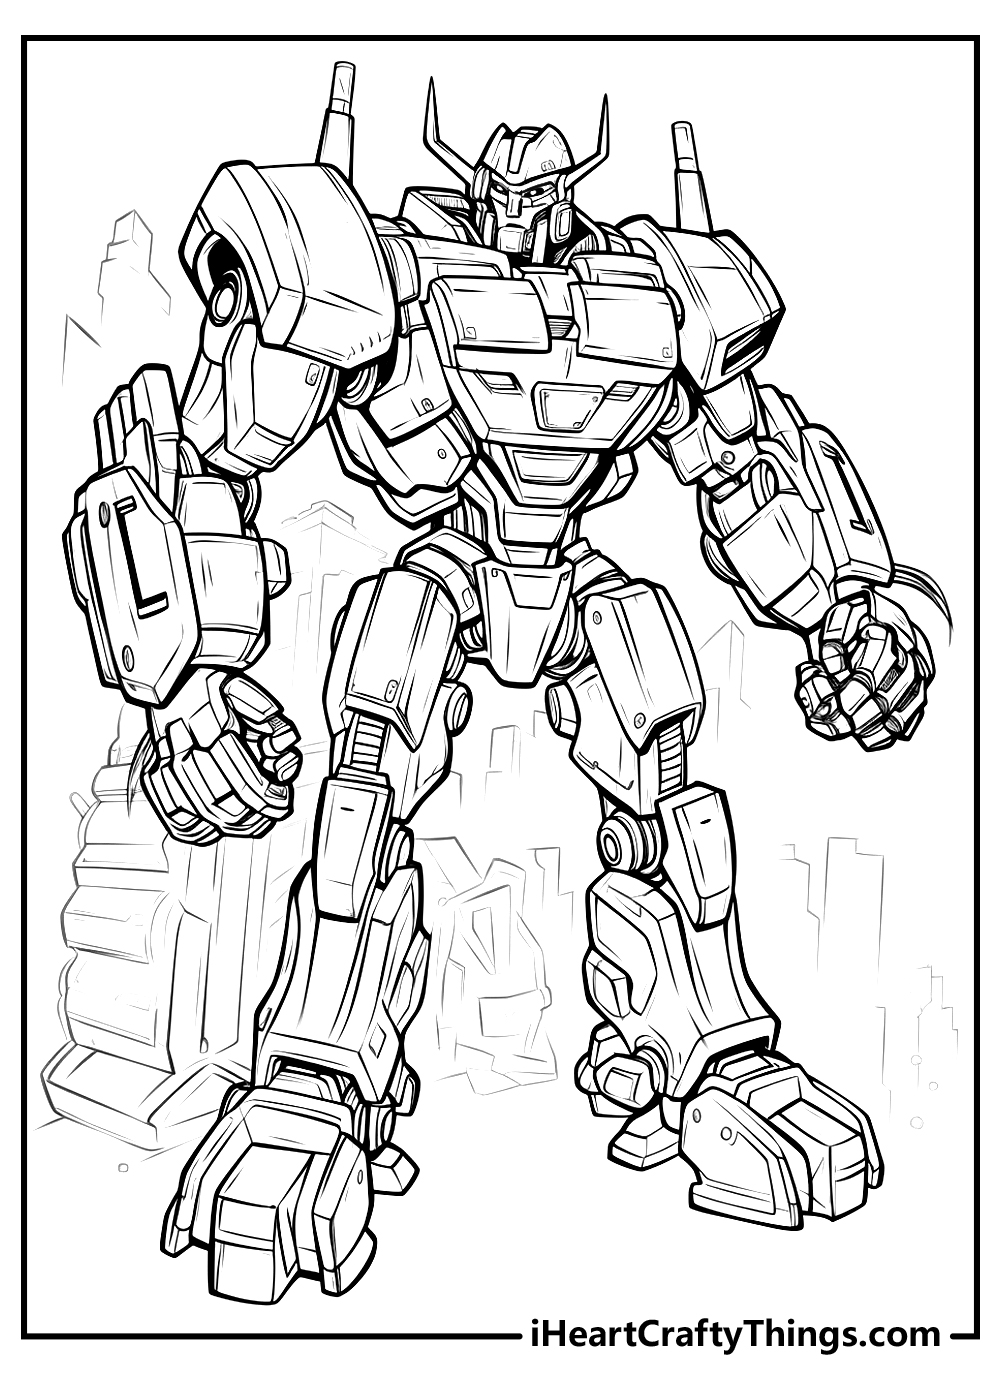 black-and-white transformers coloring sheet free download